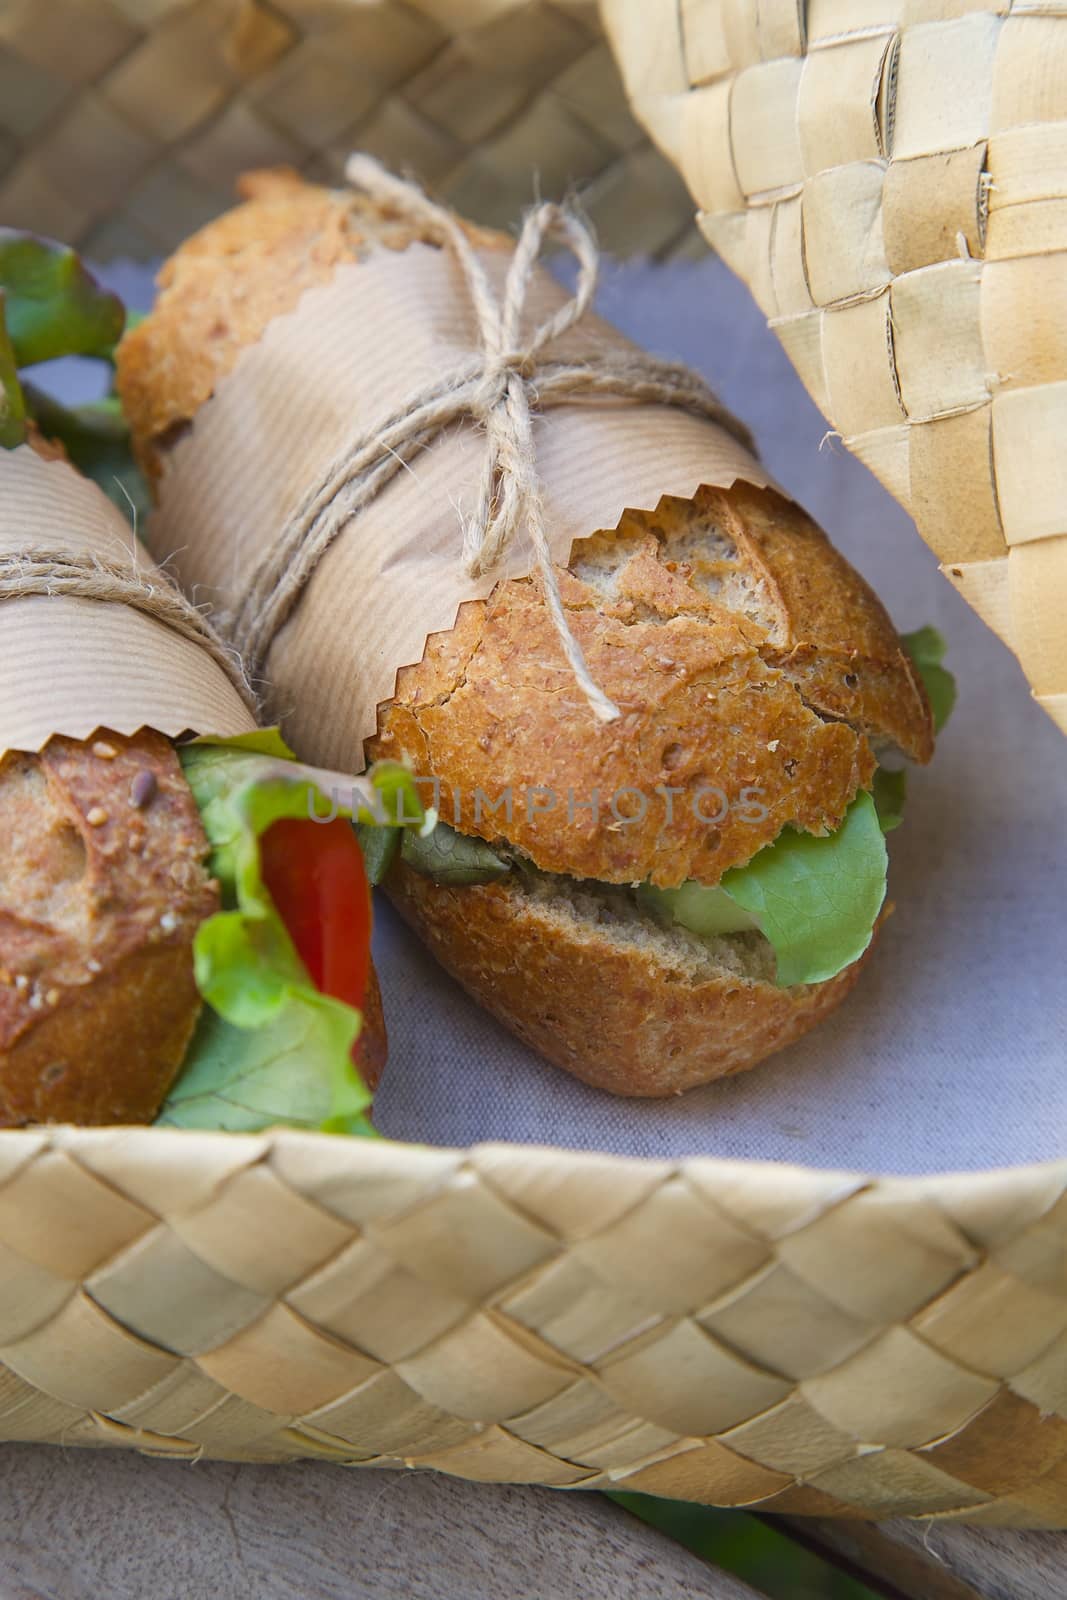 An open-air  express lunch for a vegetarian- whole grain rolls with fresh vegetables. Rolls are hidden in the woven birch basket